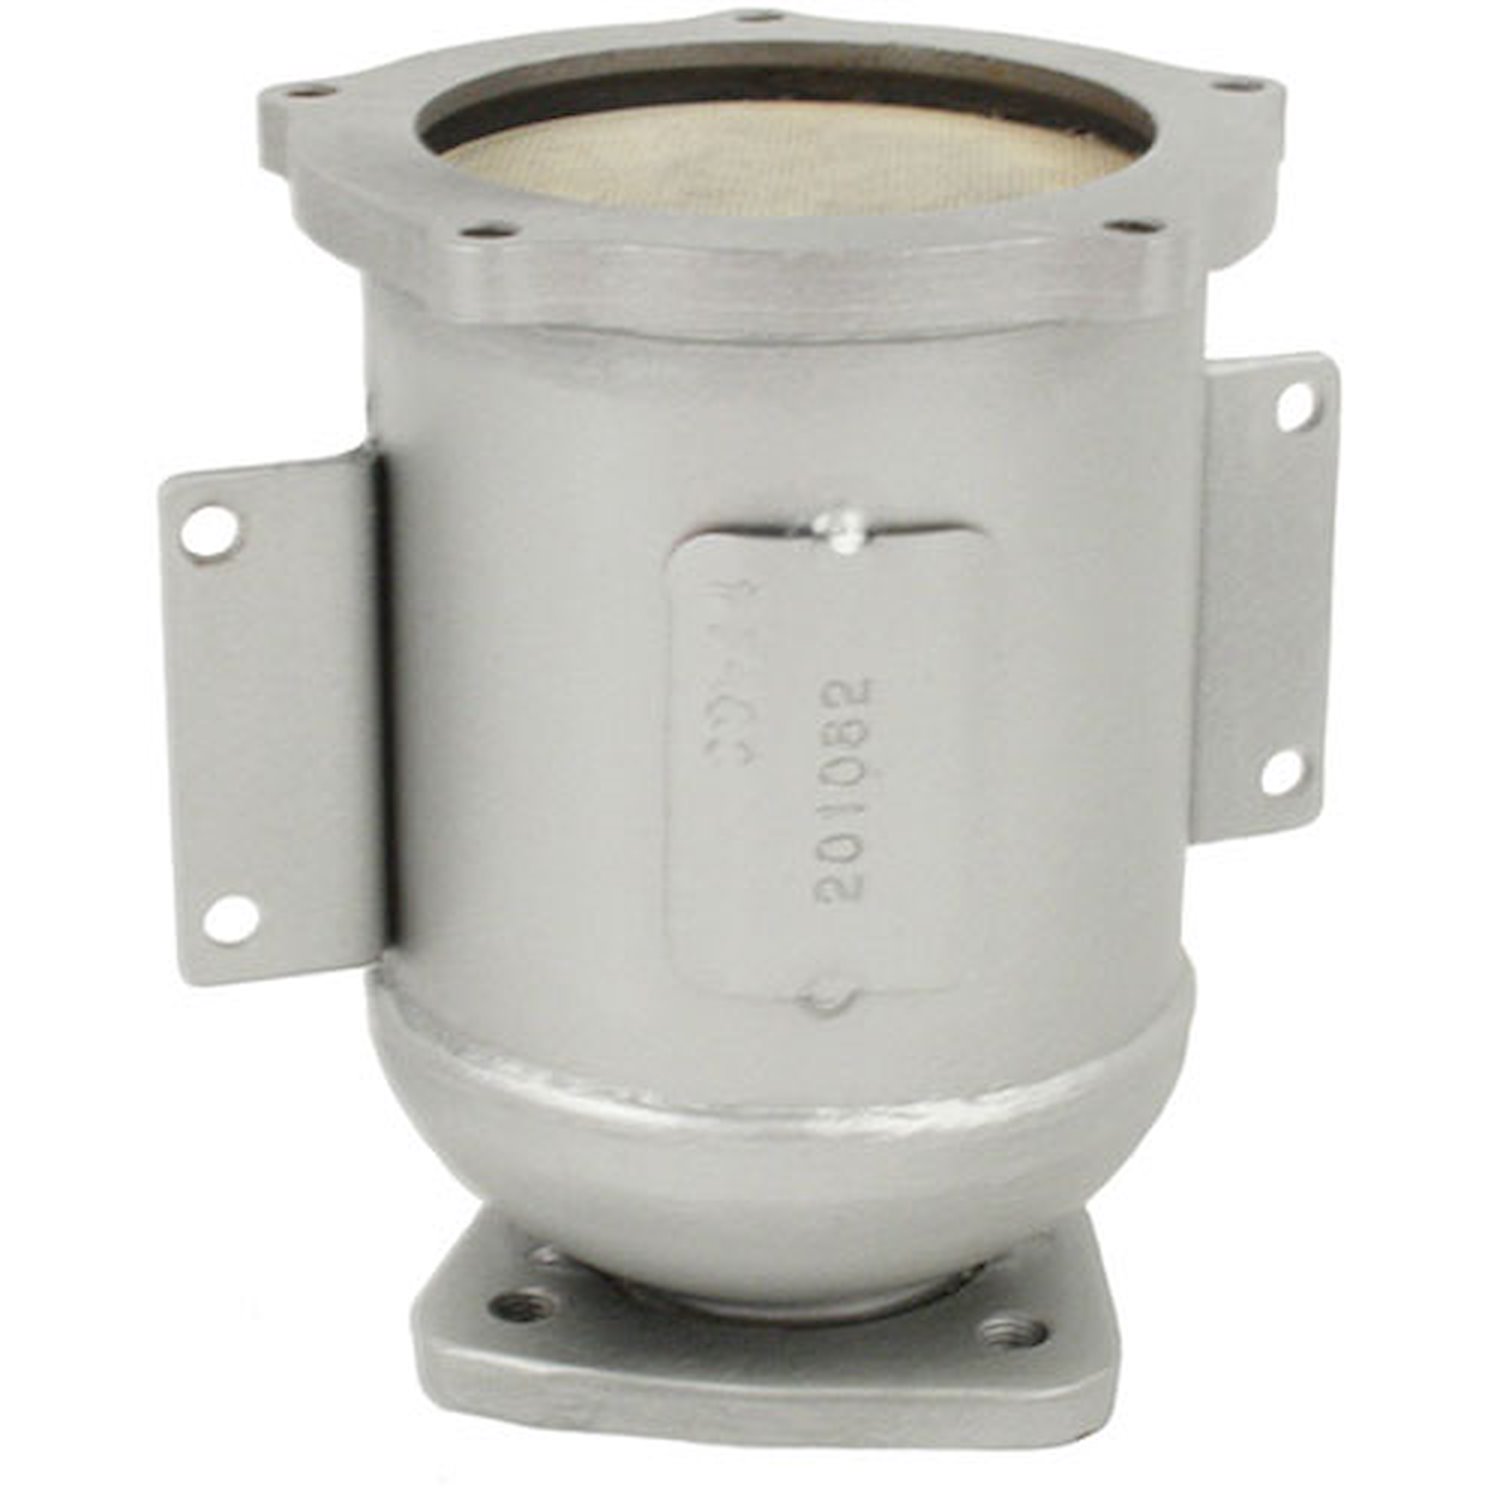 Pacesetter Direct-Fit Catalytic Converter. Direct Replacement of OEM, Low Restriction Design